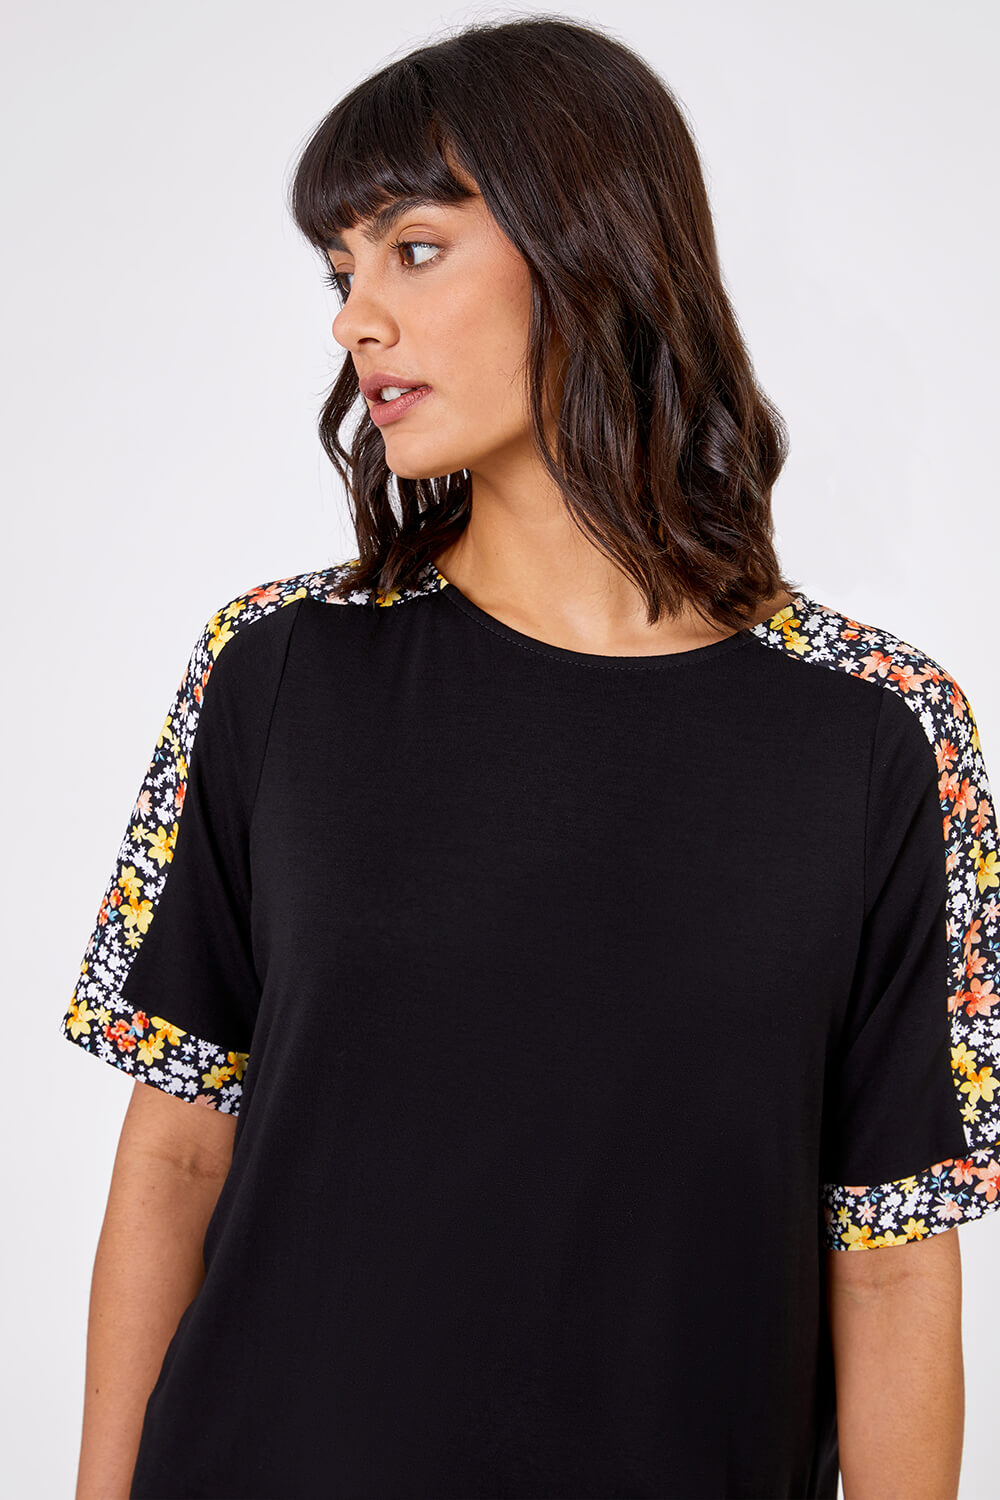 Black Floral Print Contrast Jeresey Top, Image 4 of 4